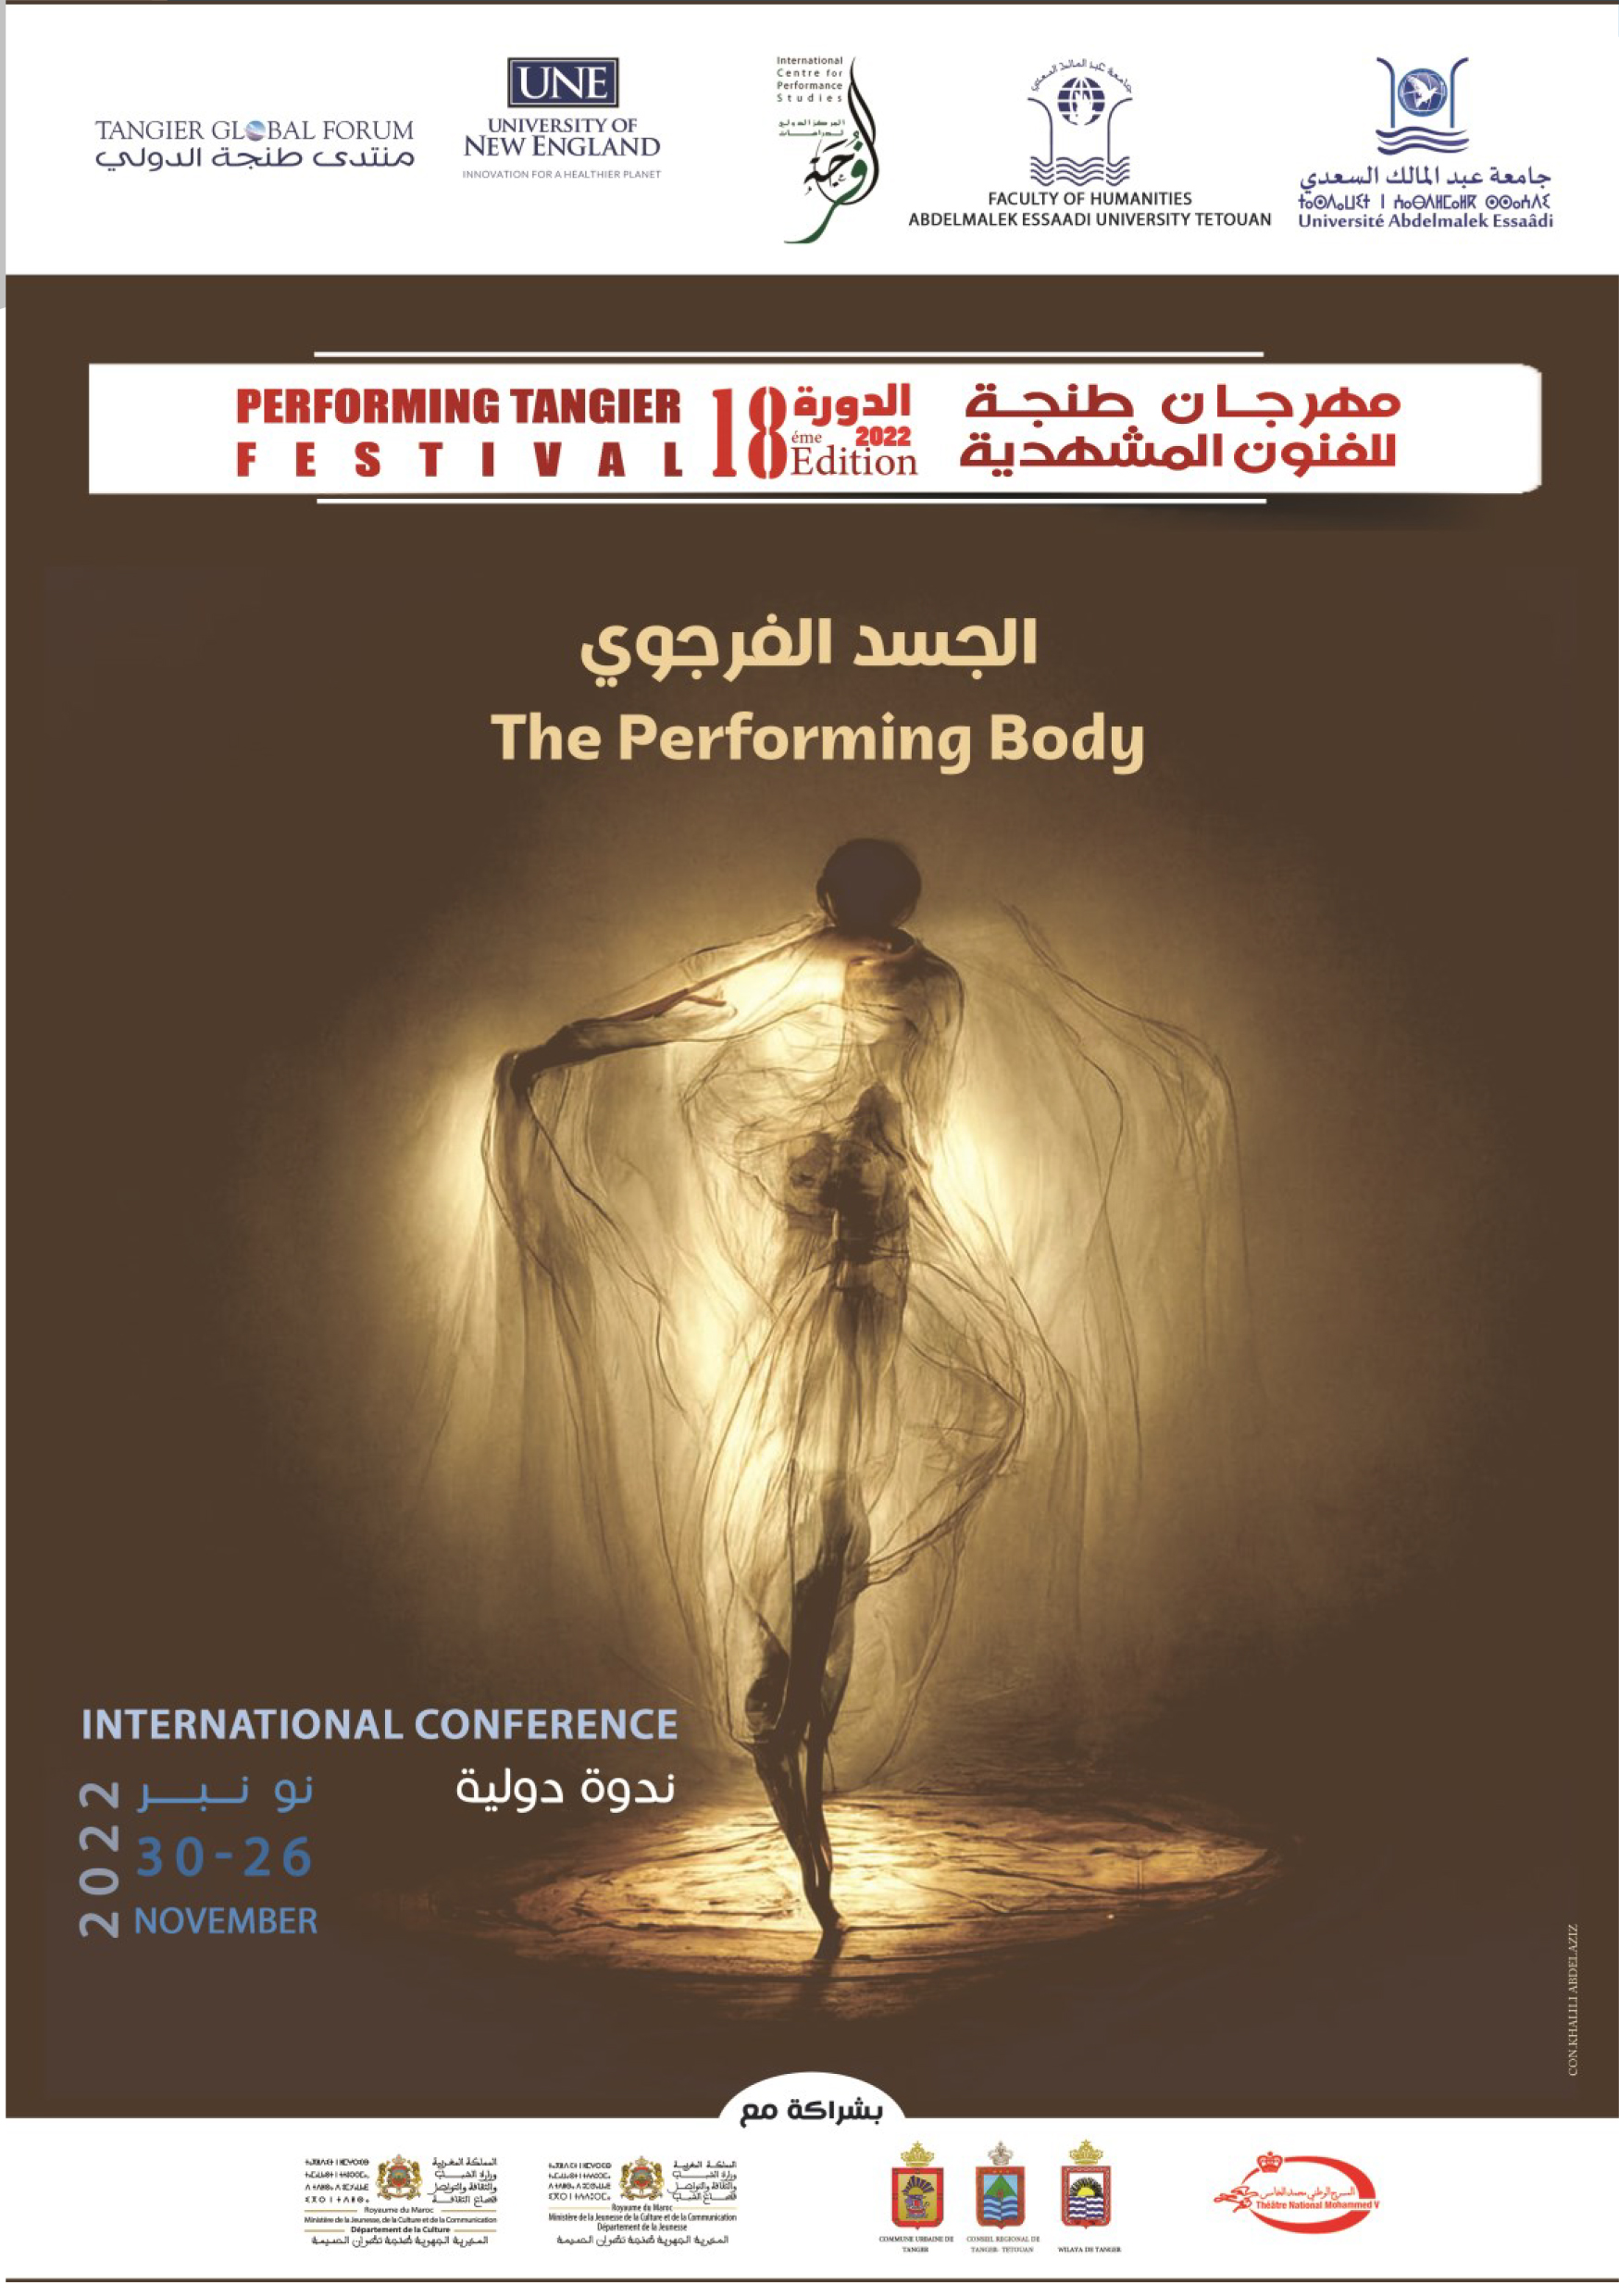 18th Annual Performing Tangier: The Performing Body